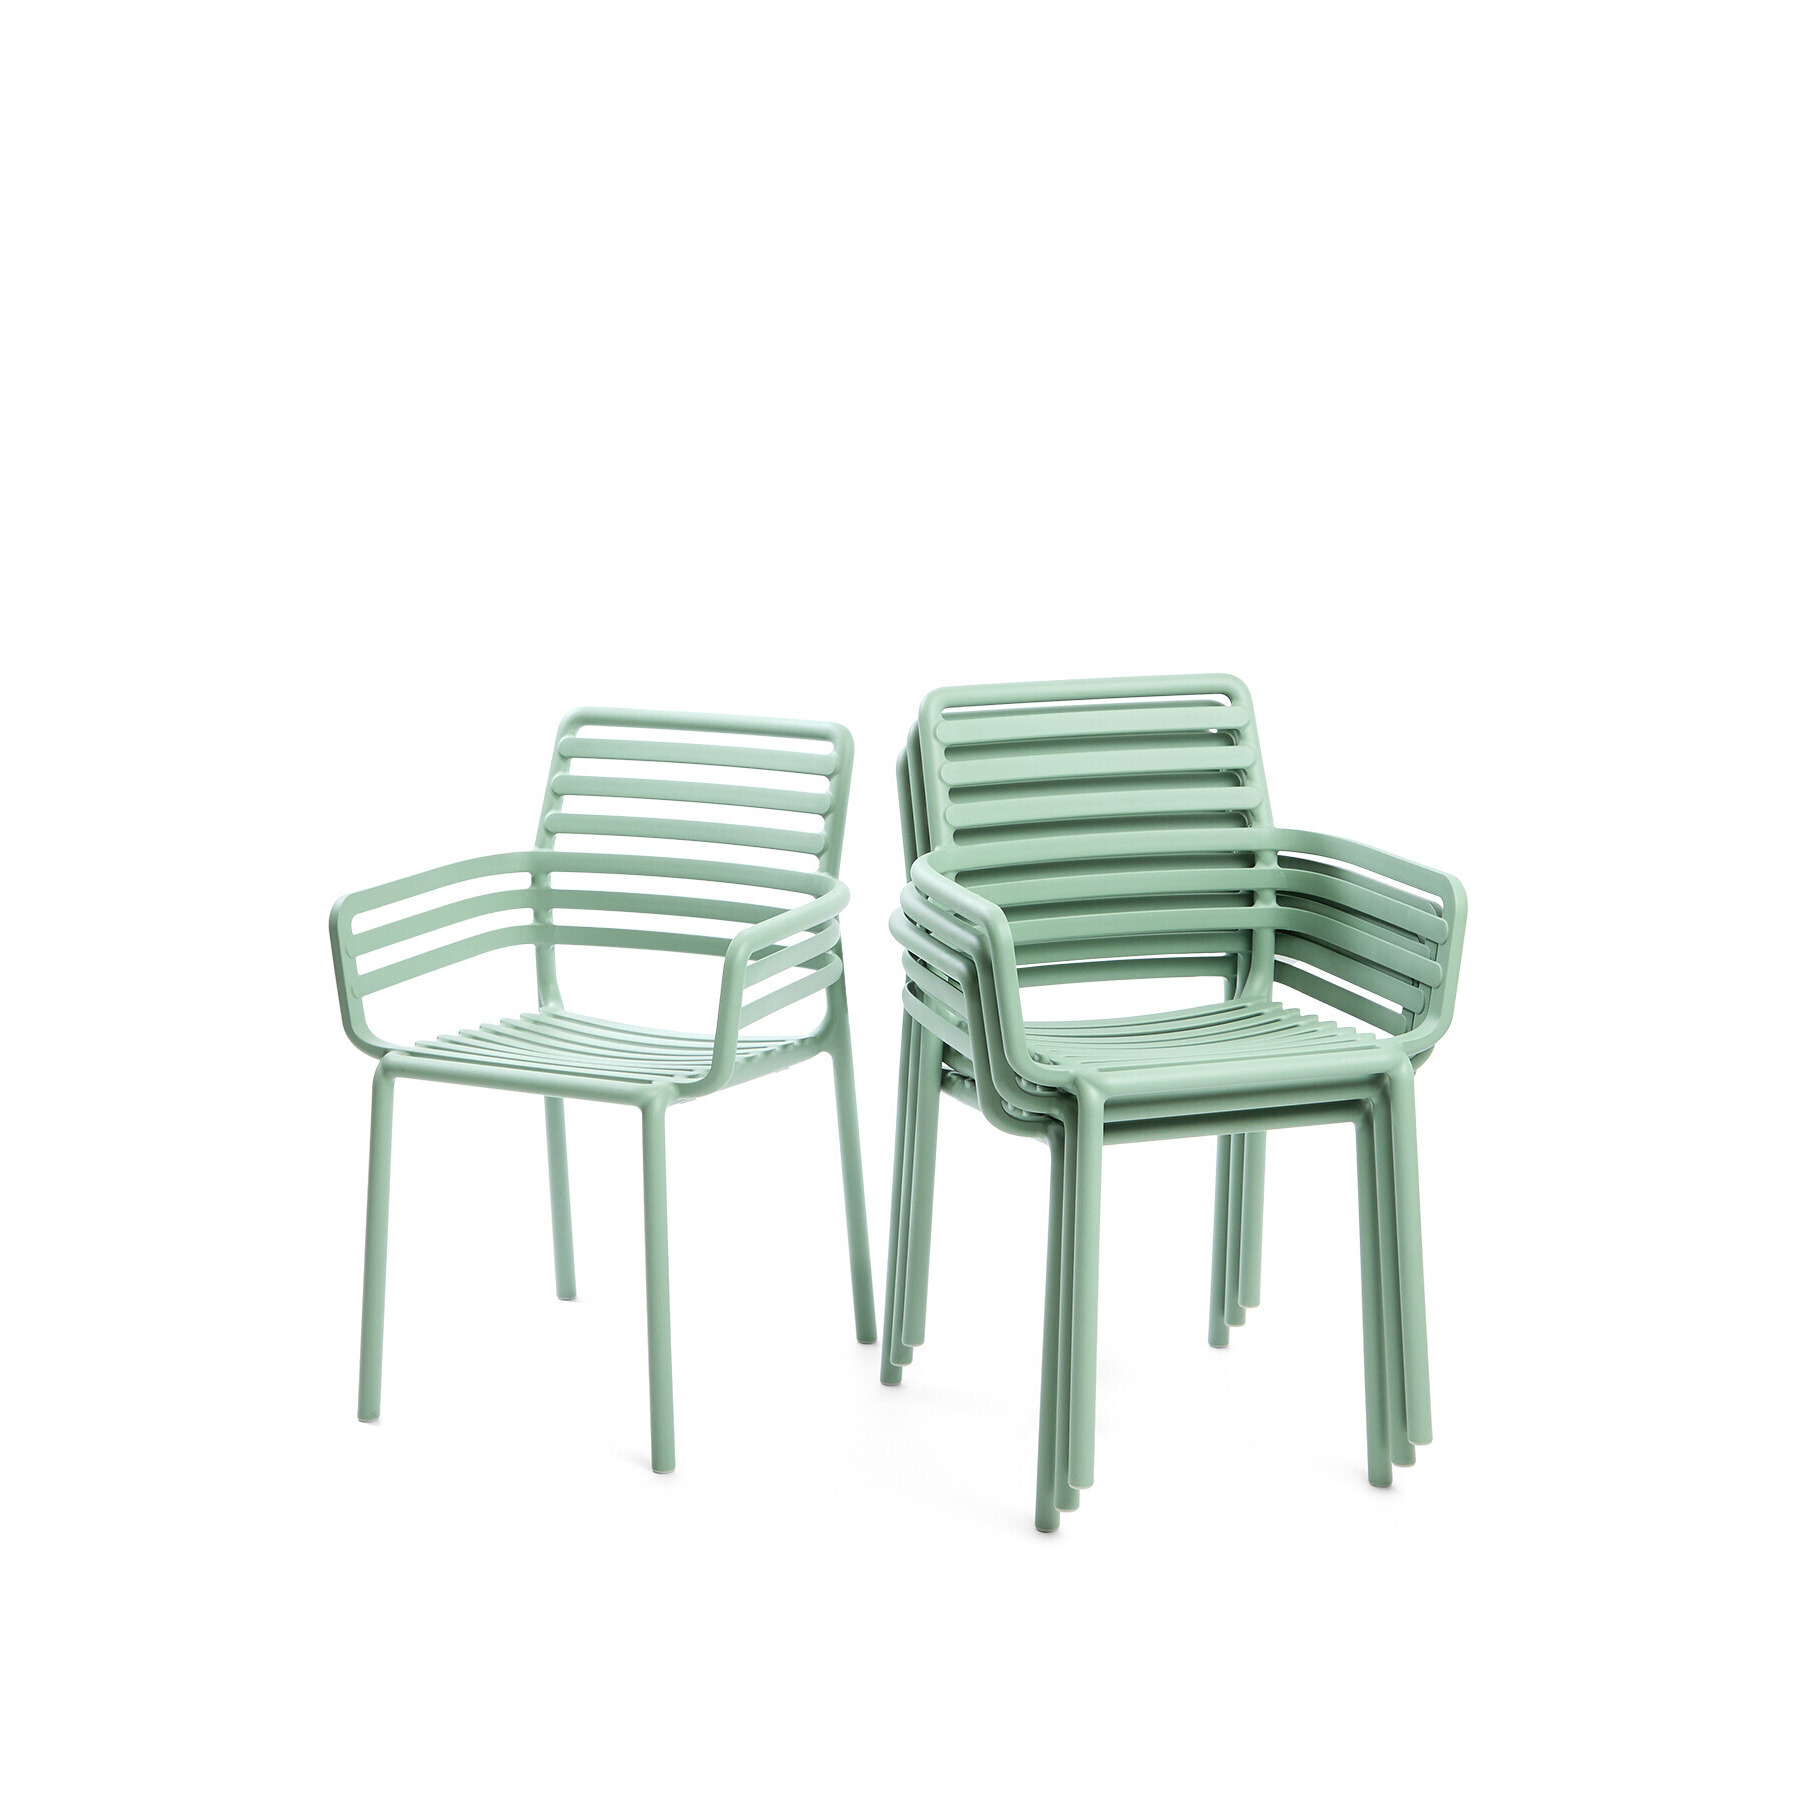 Nardi Doga Armchairs In Menta- Pack of 4 Green - image 1